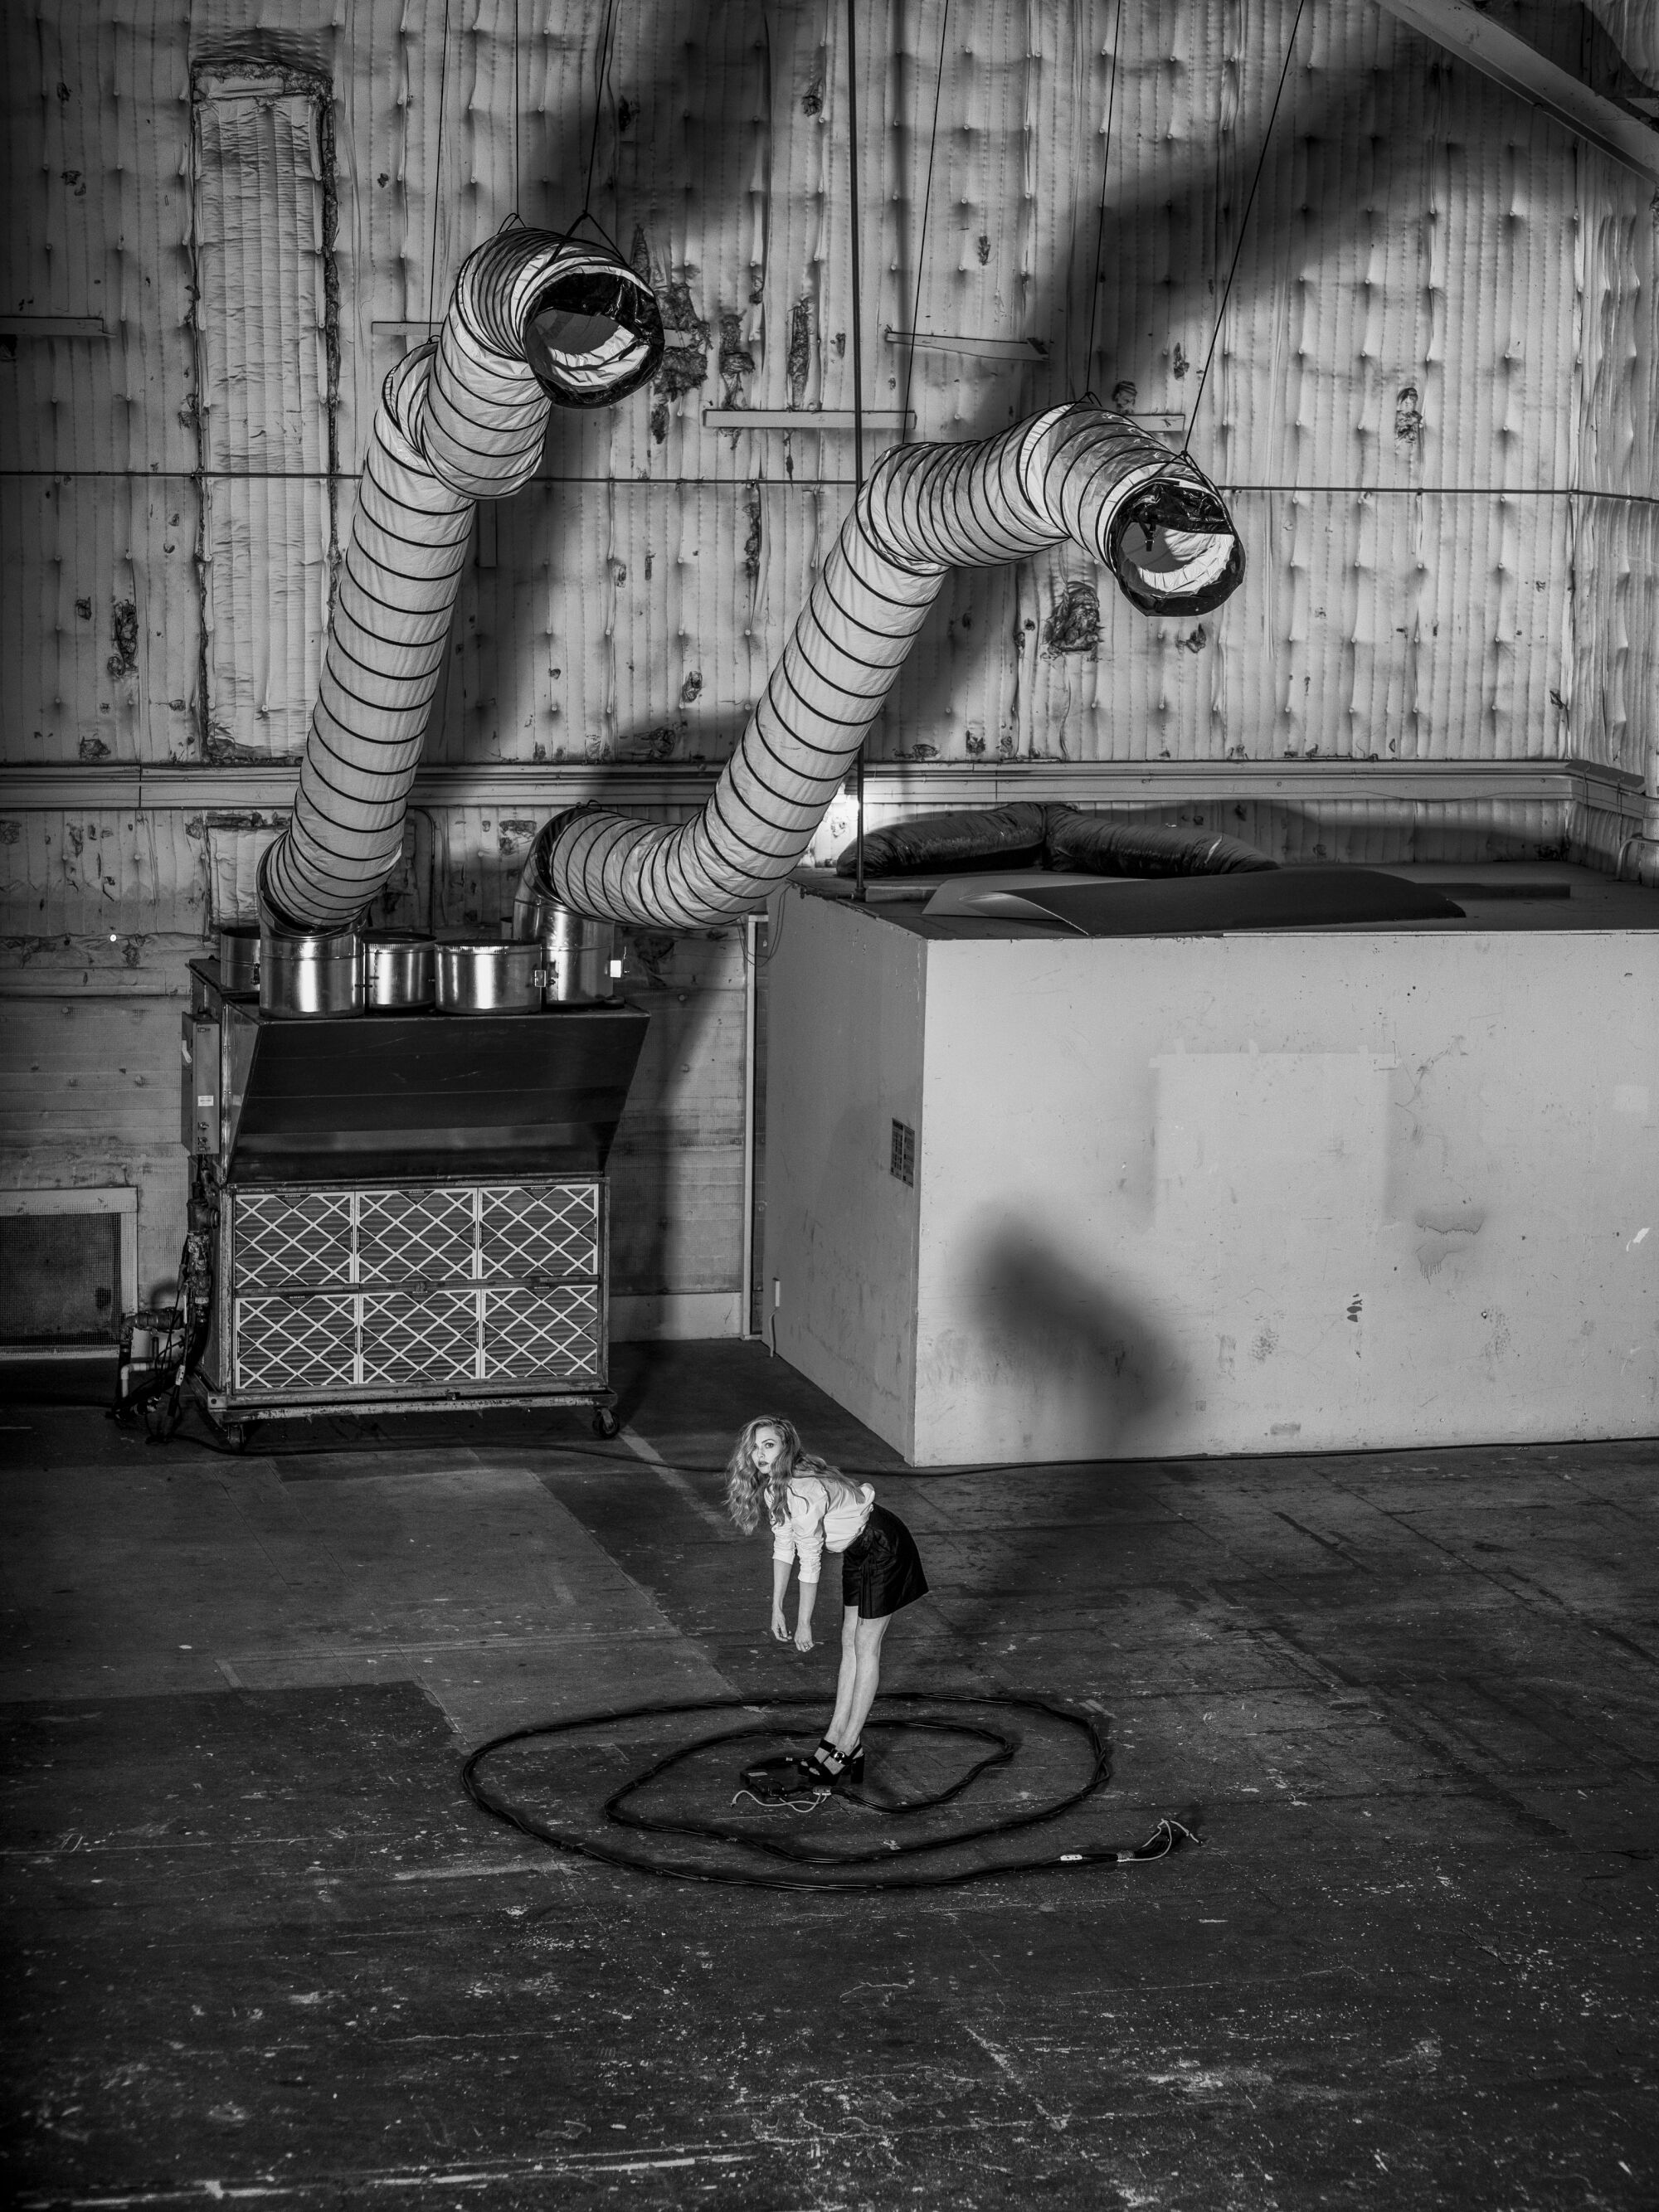 A woman stands in an empty warehouse surrounded by a spiral of cables